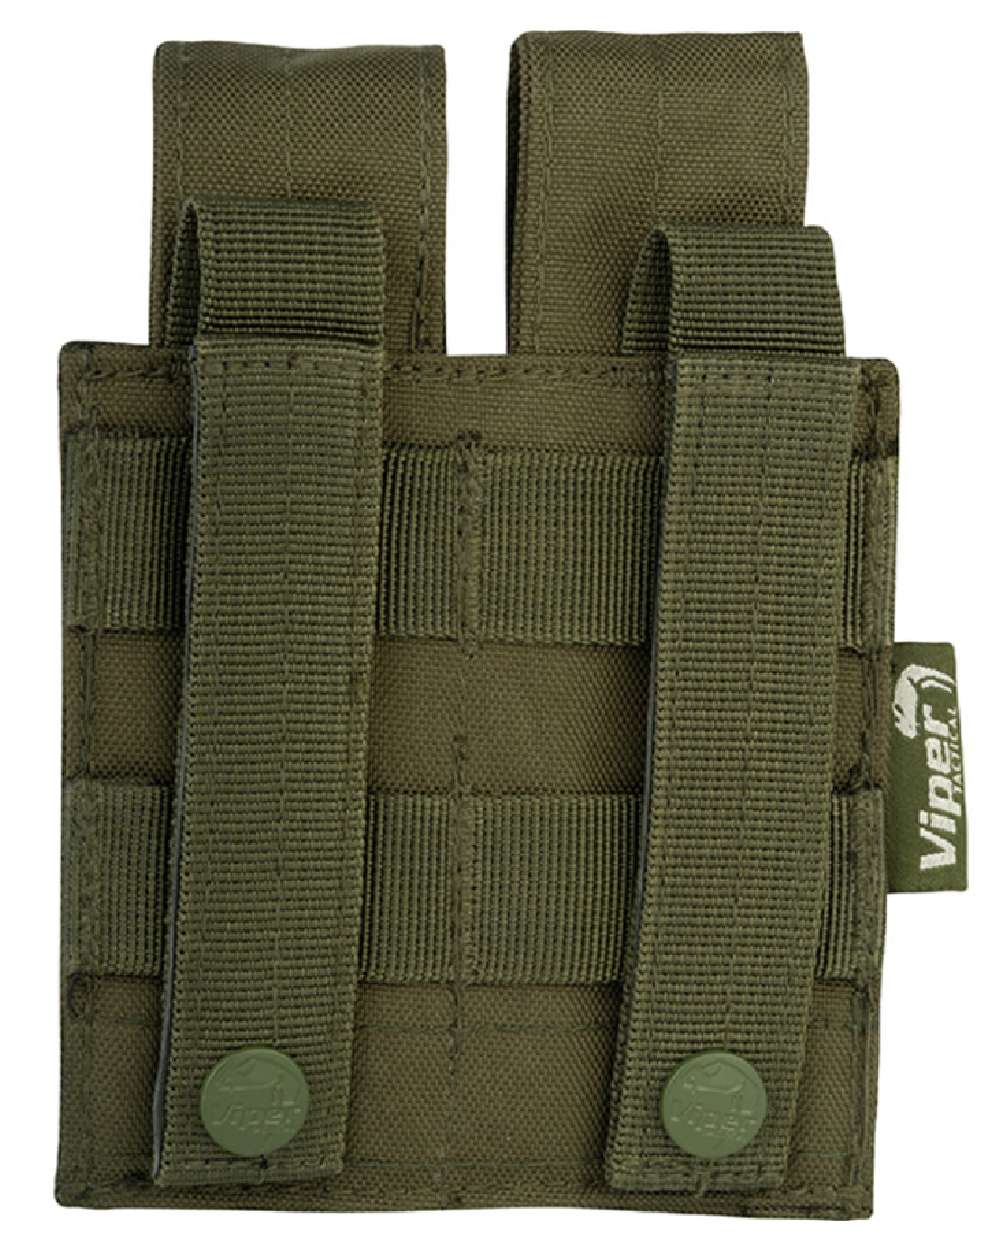 Viper Modular Double Pistol Mag Pouch in Green 